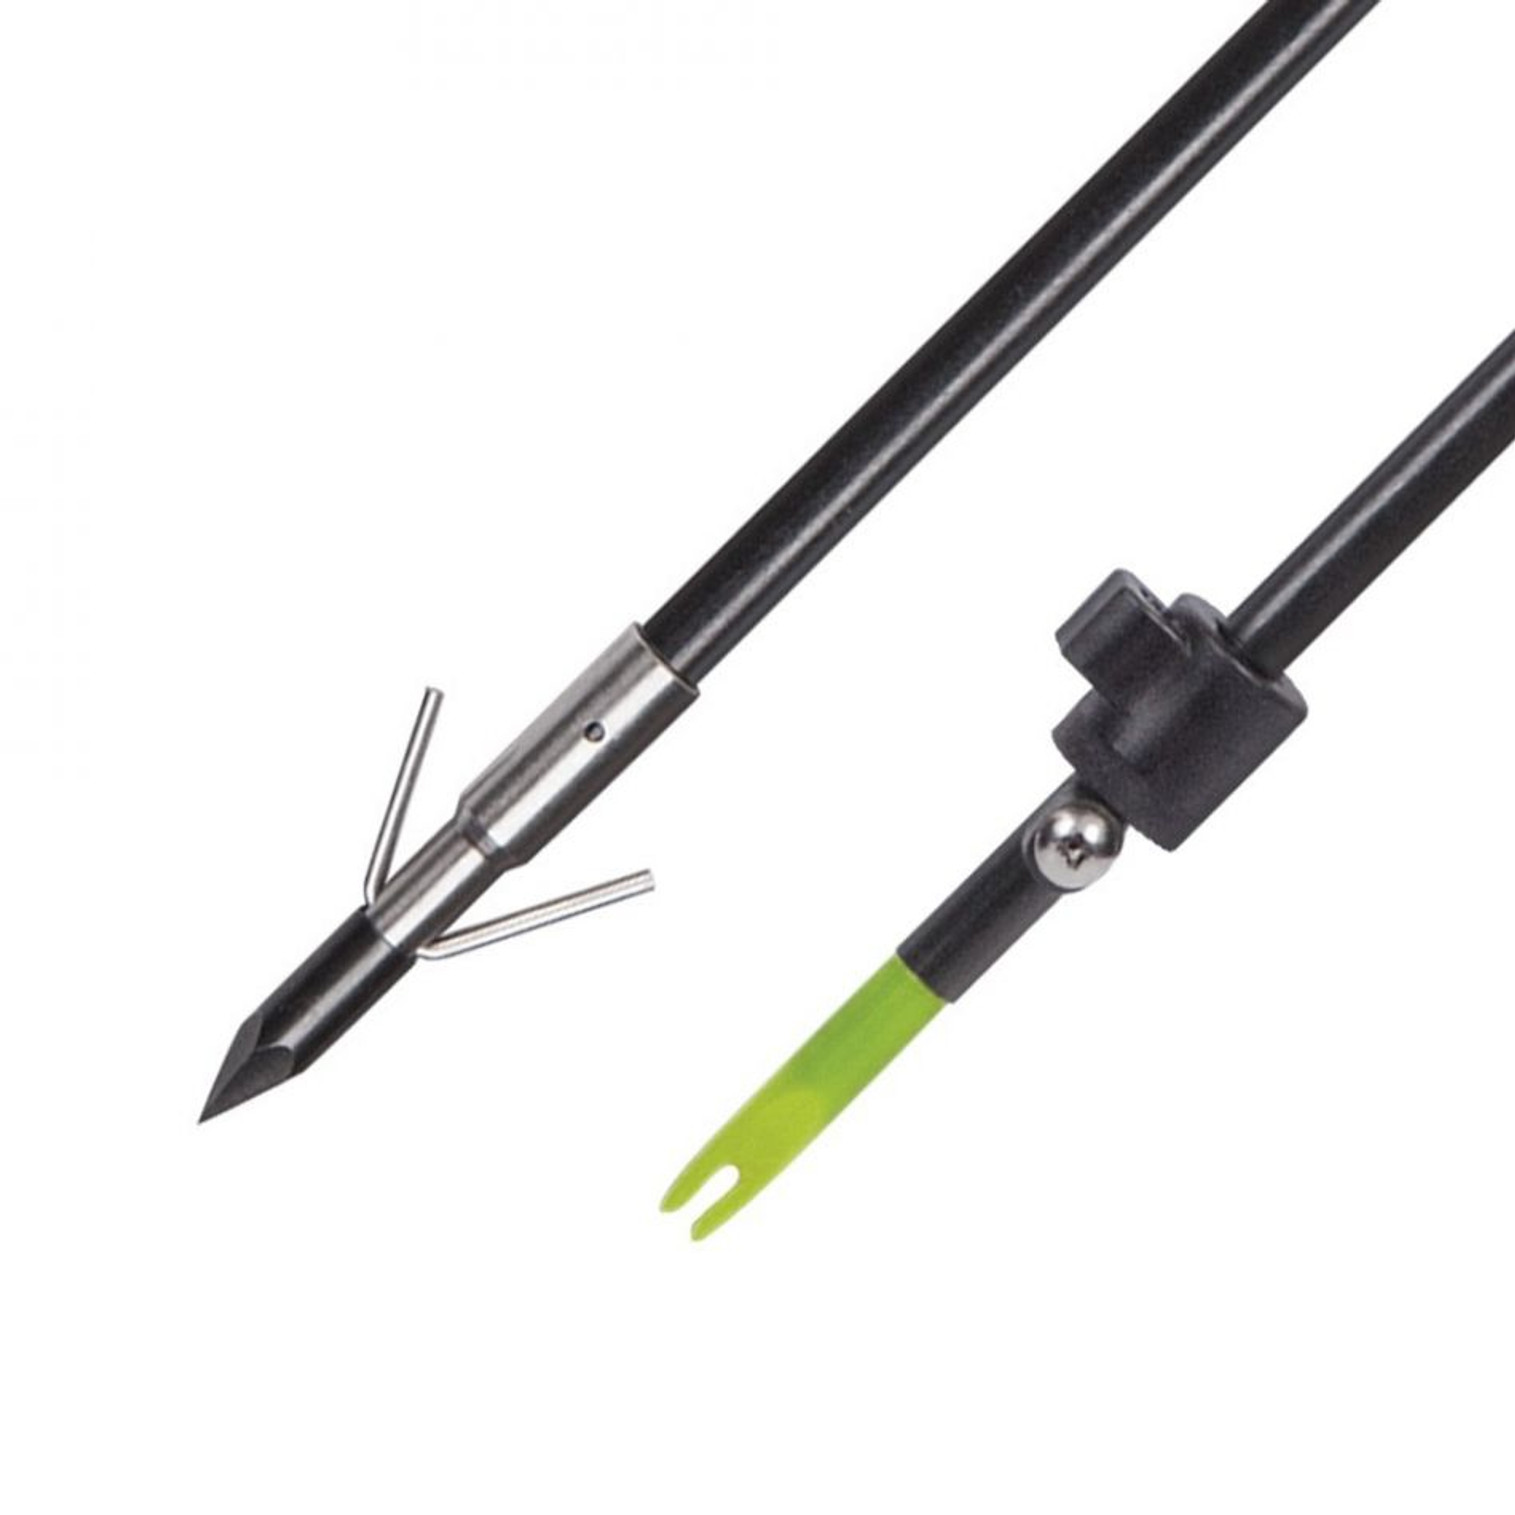 CenterPoint Bow Fishing Arrow 2 Pack